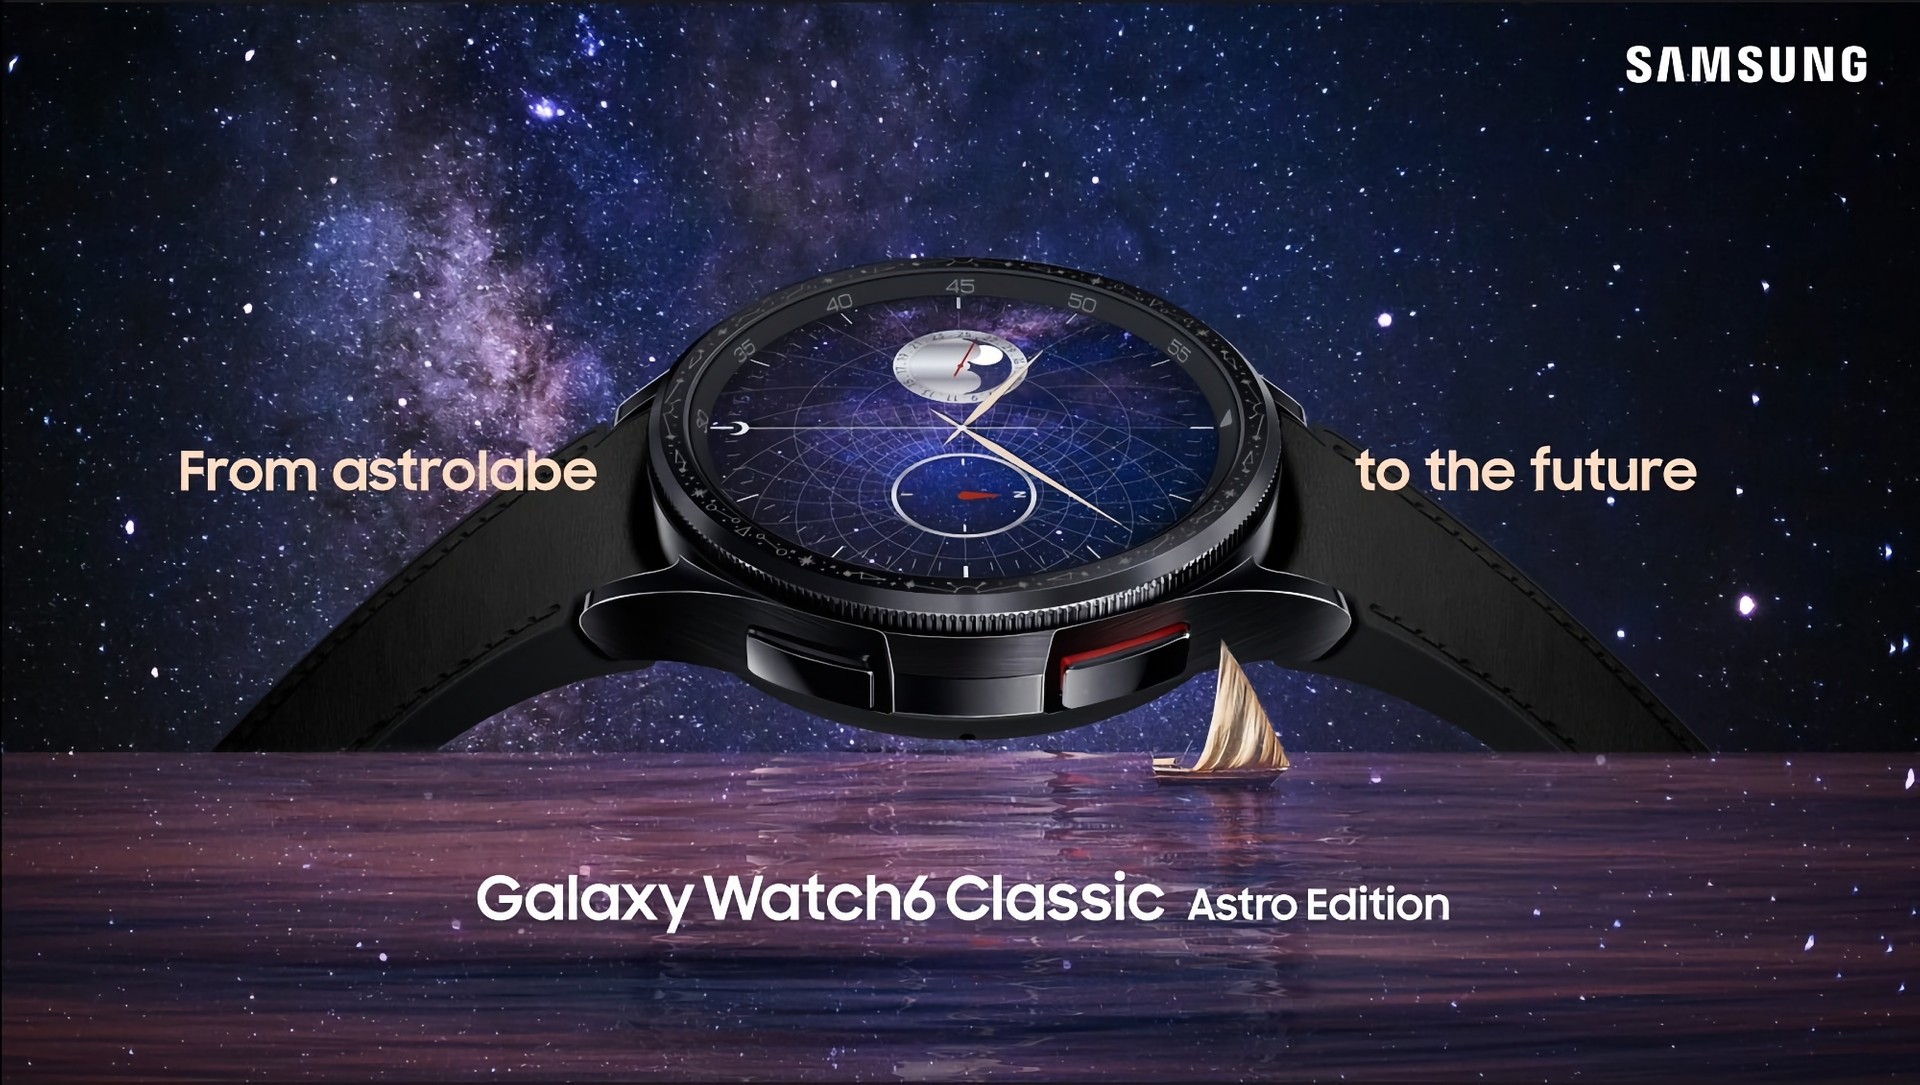 Galaxy Watch 6 Classic: Samsung launches the “Astro Edition” of the watch inspired by the astrolabe